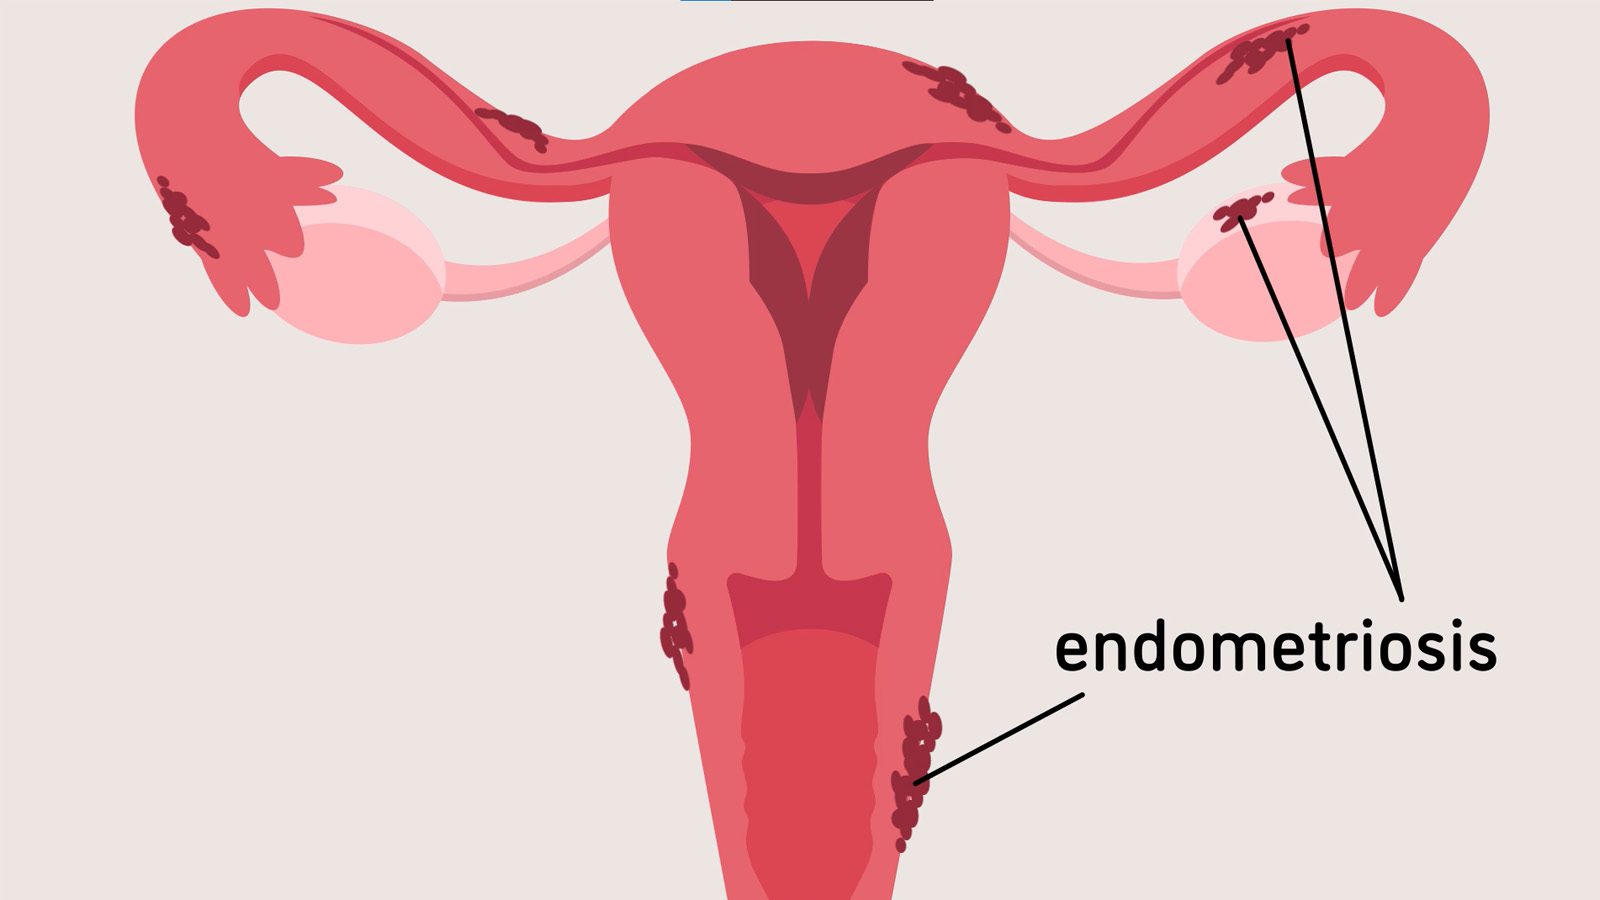 Learn all about endometriosis in this Minute to Understanding from the Jackson Laboratory